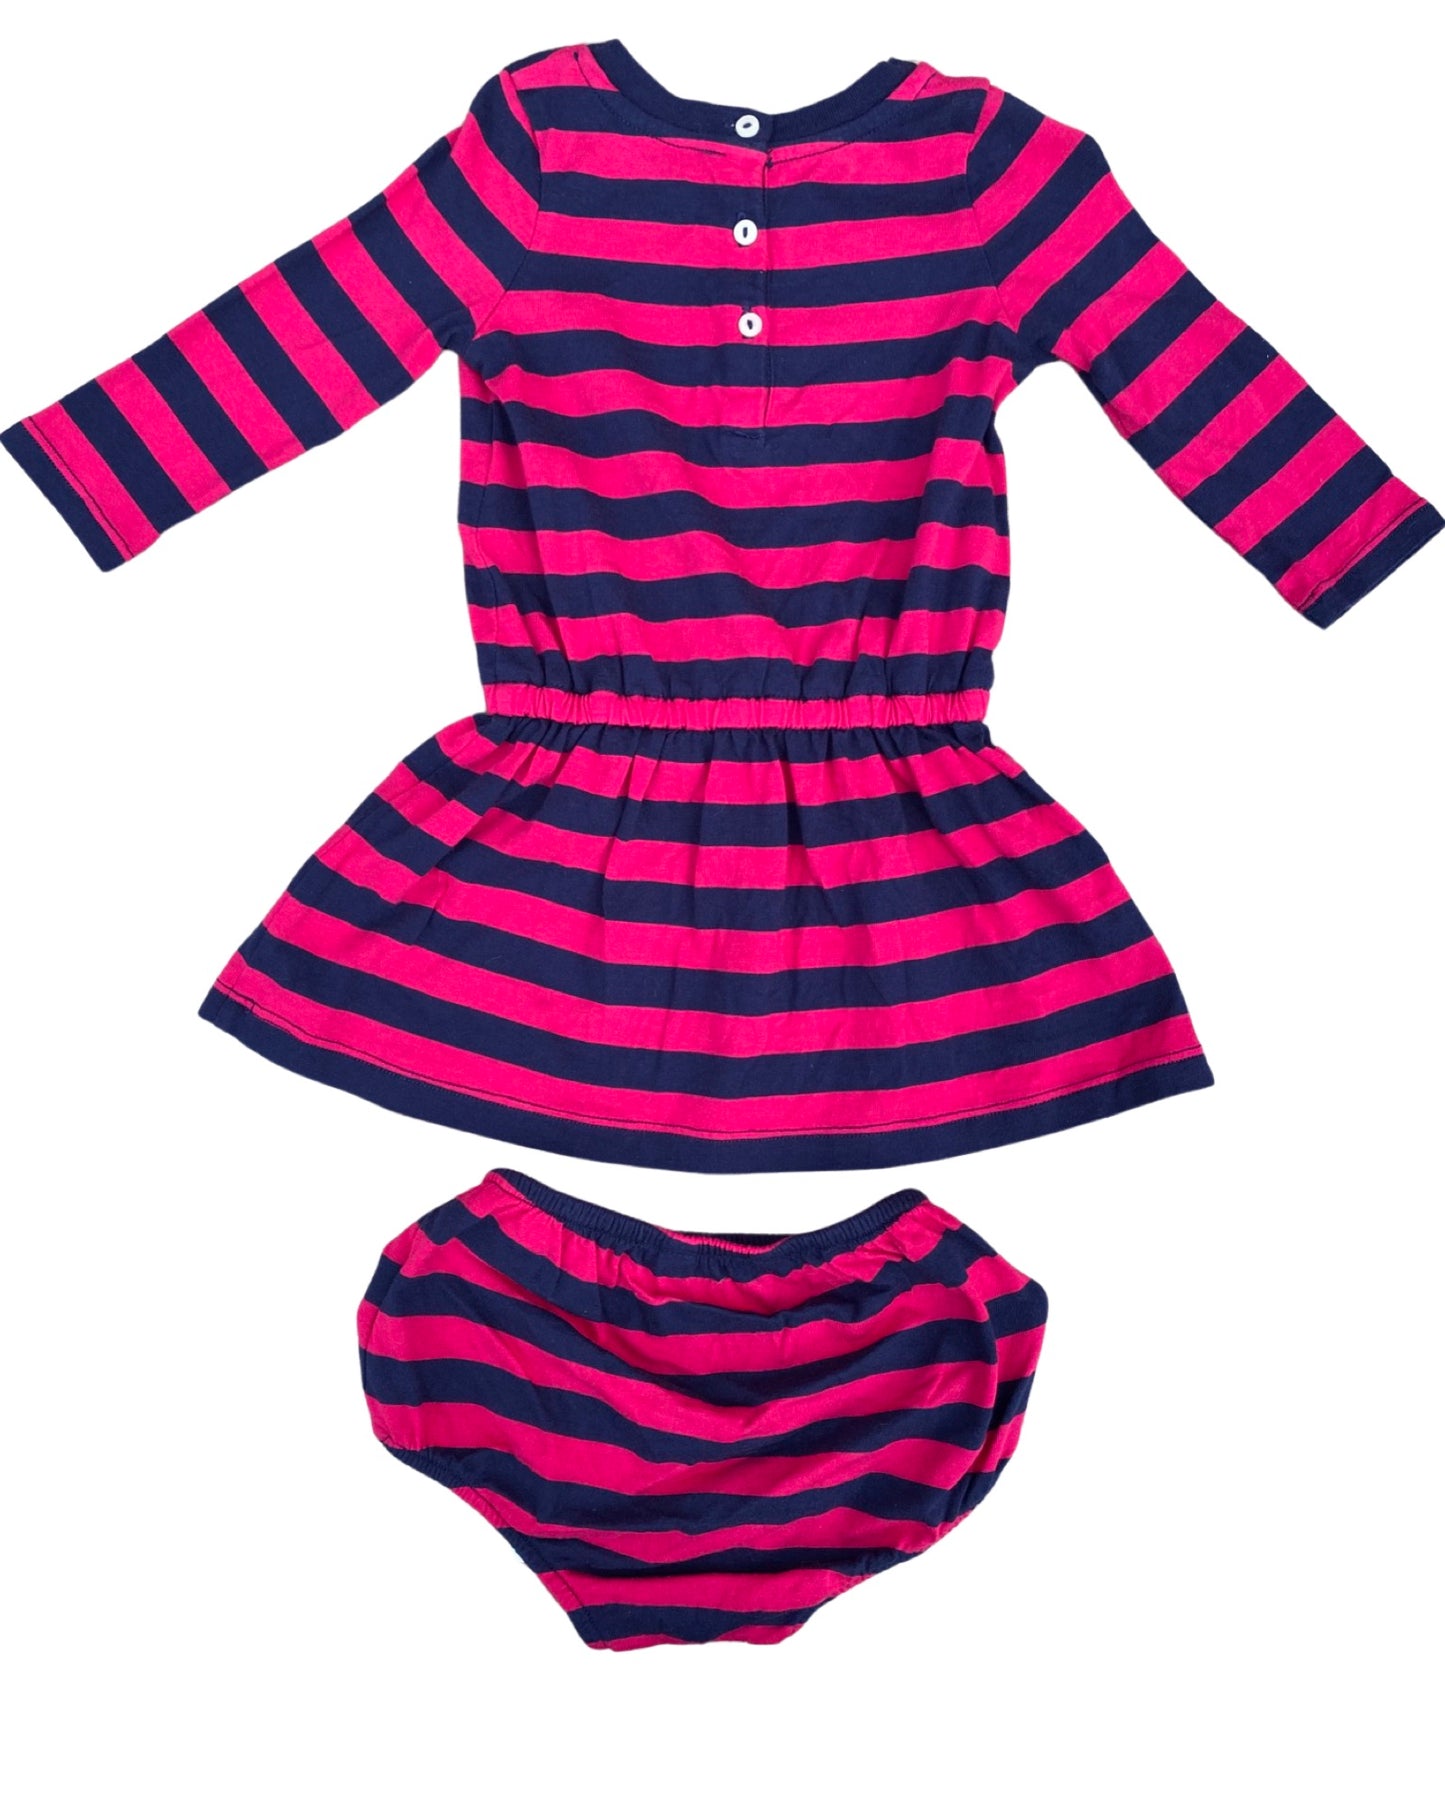 Ralph Lauren striped navy/pink jersey dress with matching nappy cover (3-6mths)